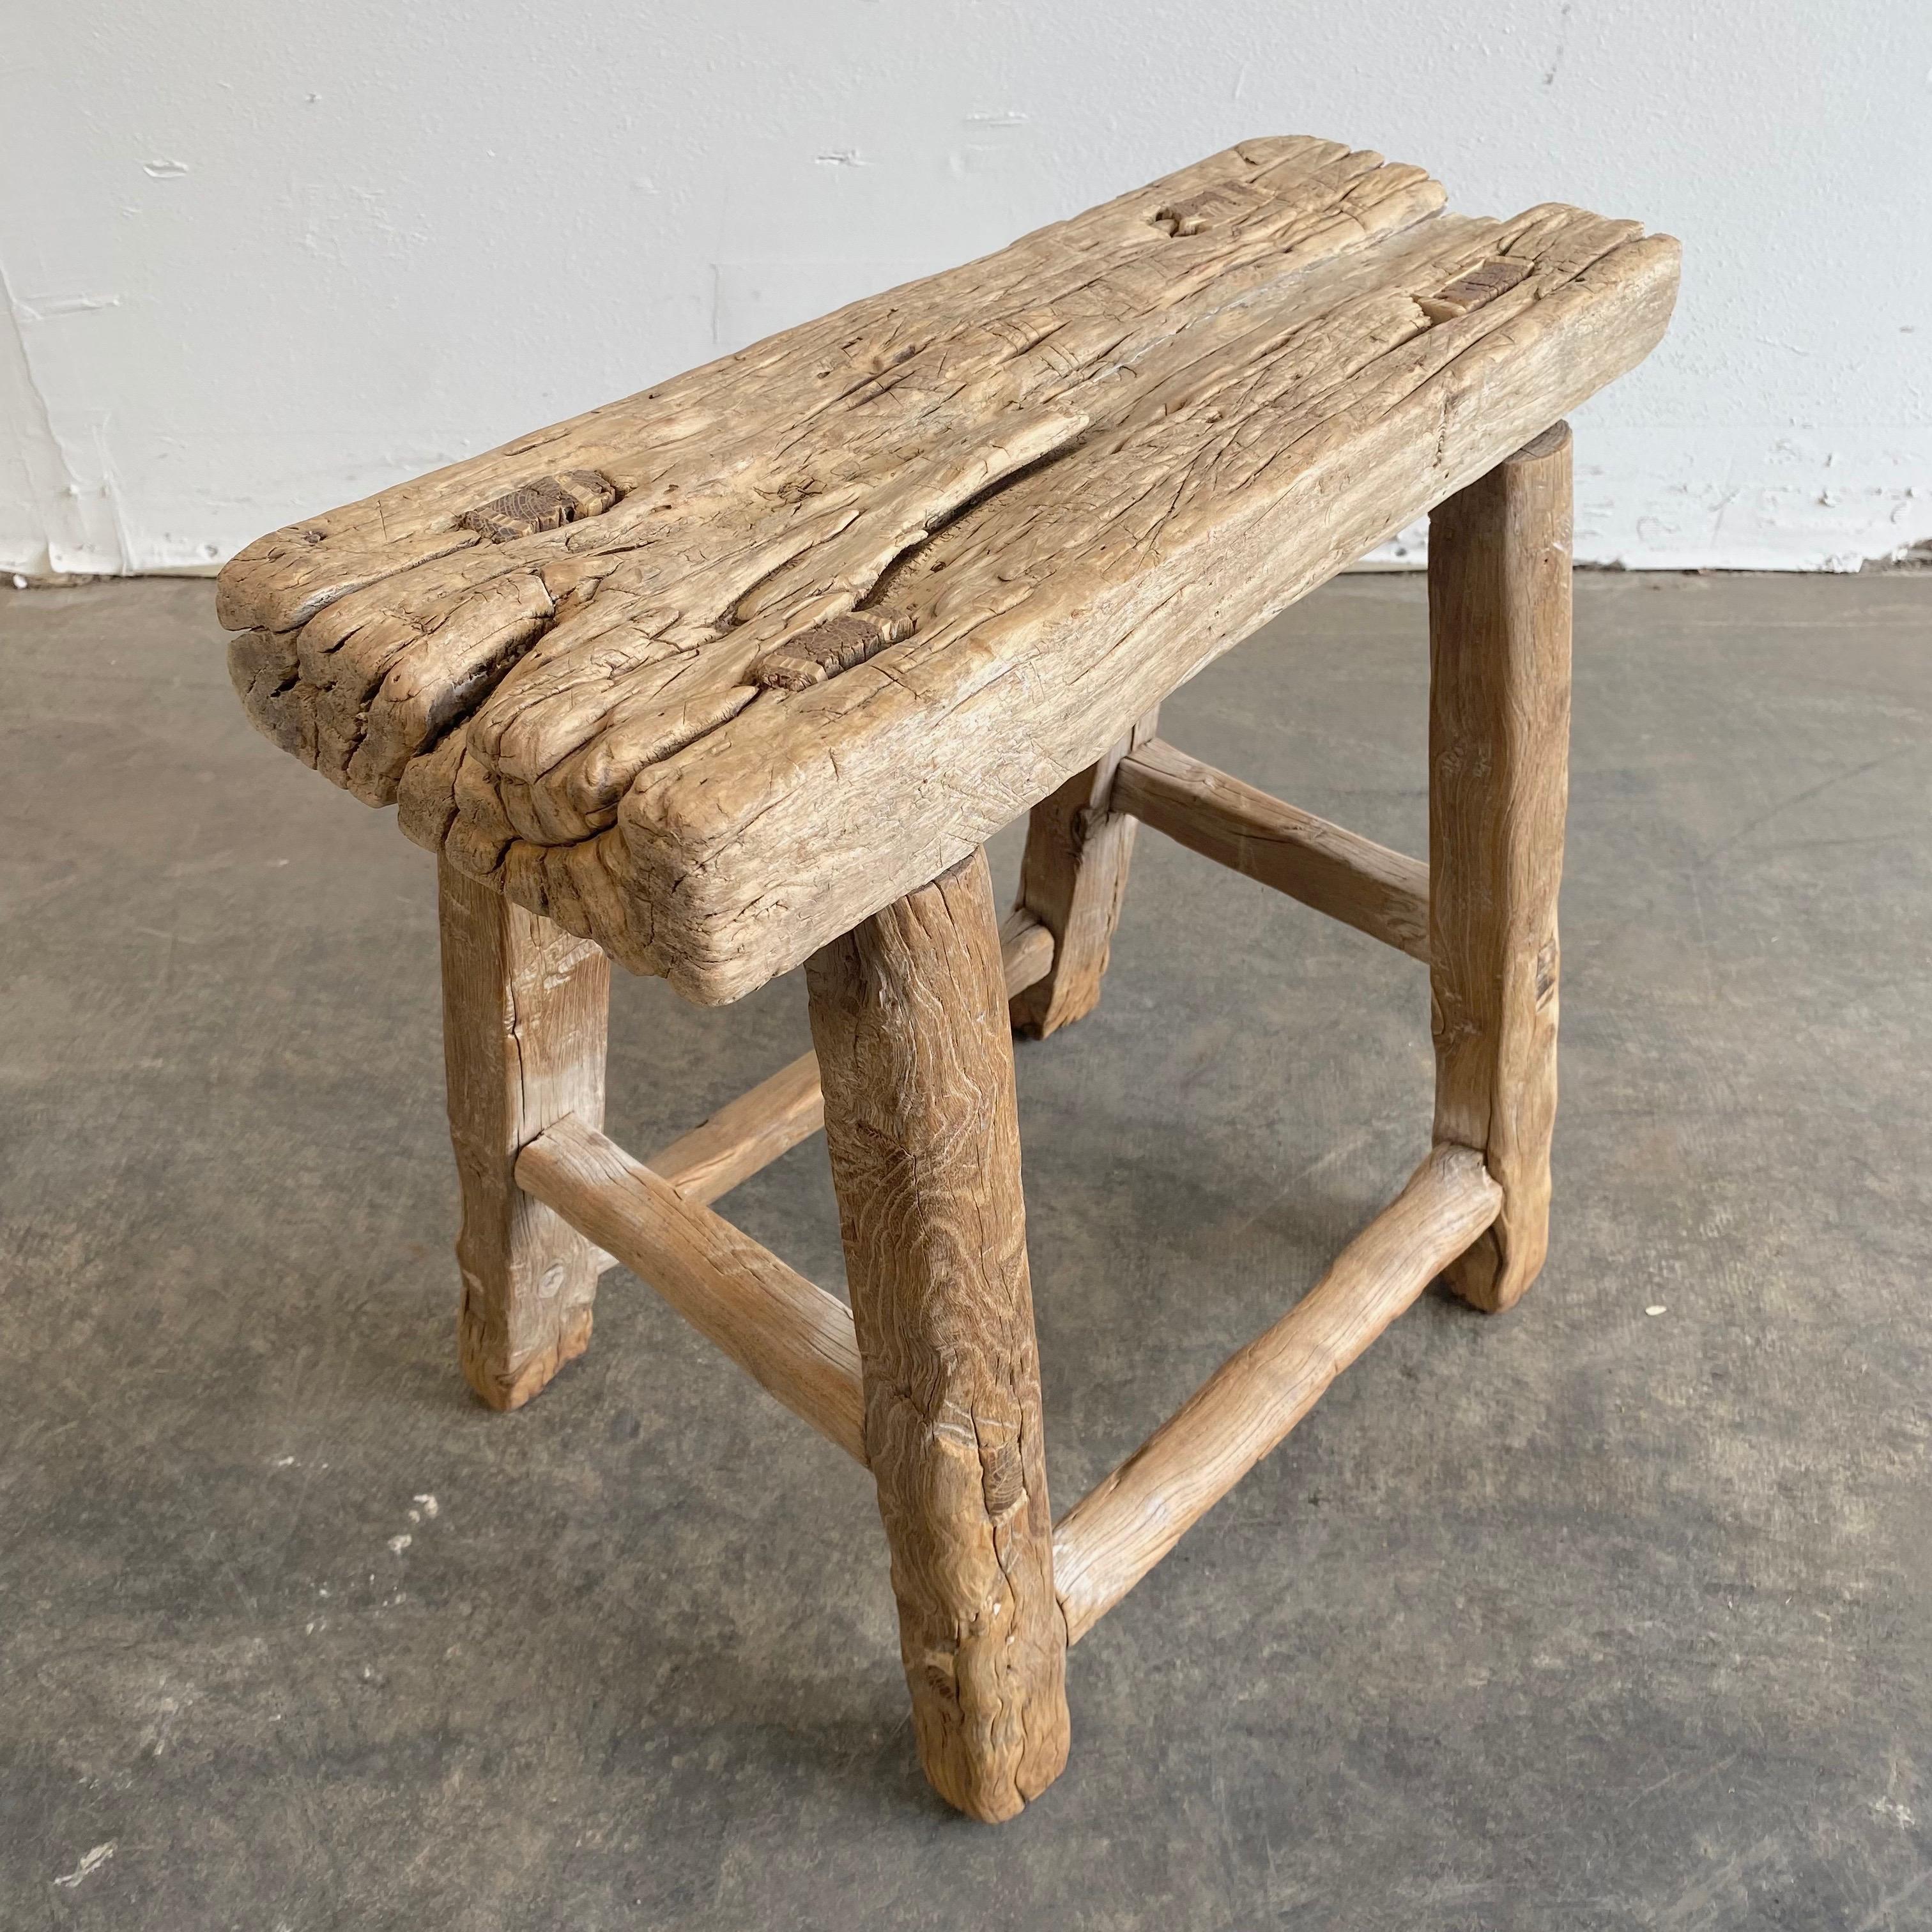 Vintage antique elm wood stool
These are the real vintage antique elm wood stools! Beautiful antique patina, with weathering and age, these are solid and sturdy ready for daily use, use as a table, stool, drink table, they are great for any space.